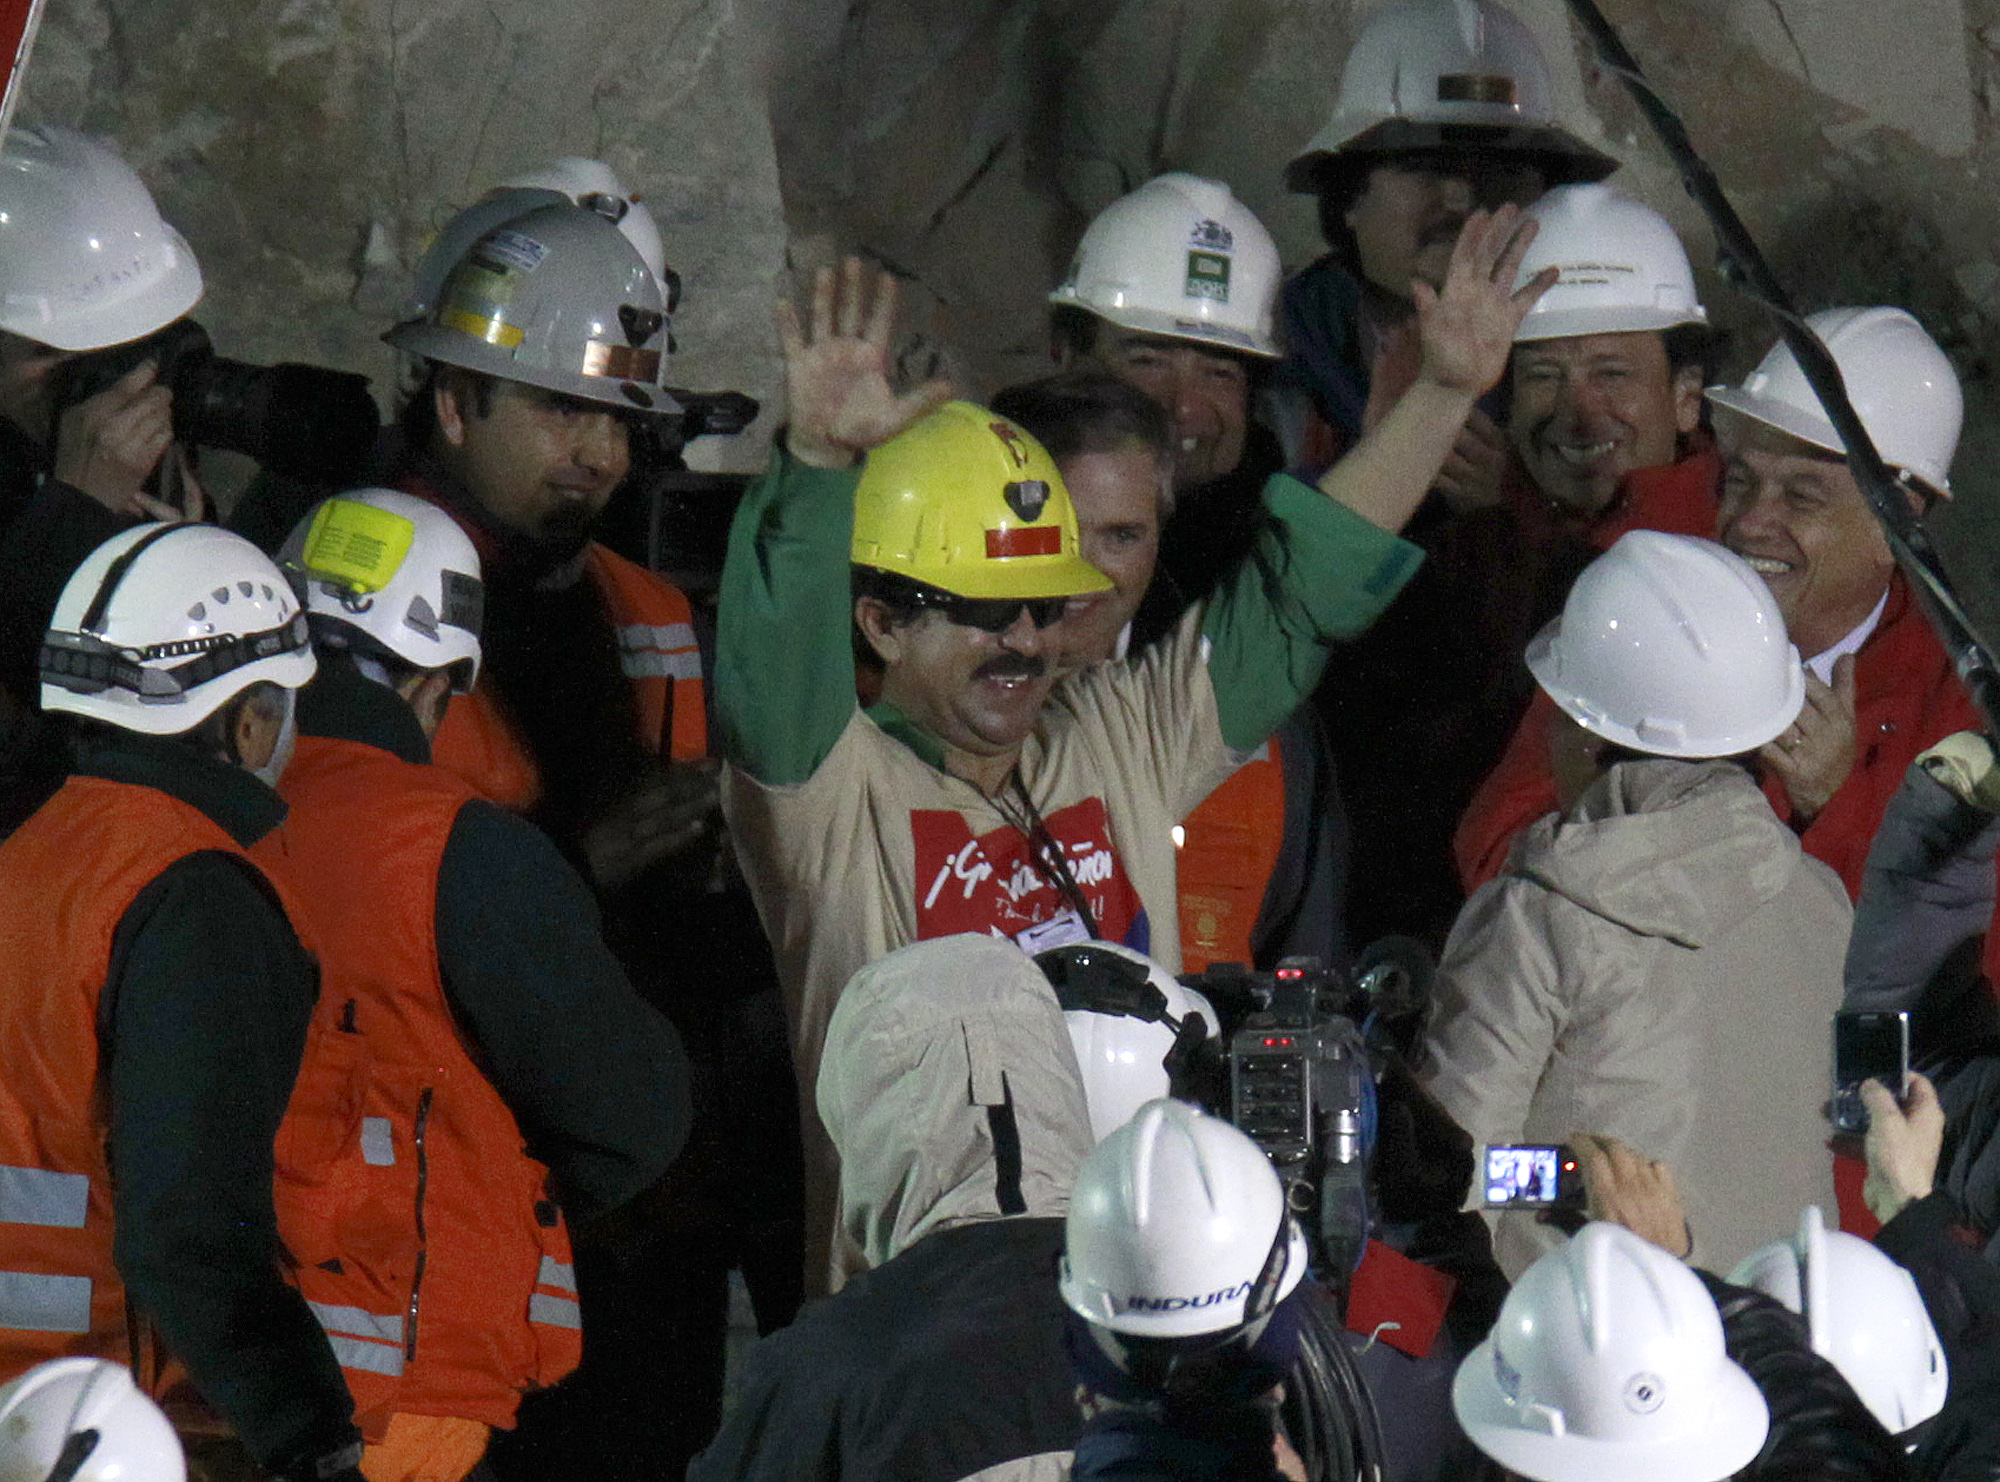 Miner Juan Andres Illanes Palma salutes after being rescued from the collapsed San Jose gold and copper mine near Copiapo, Chile on Oct. 13, 2010.